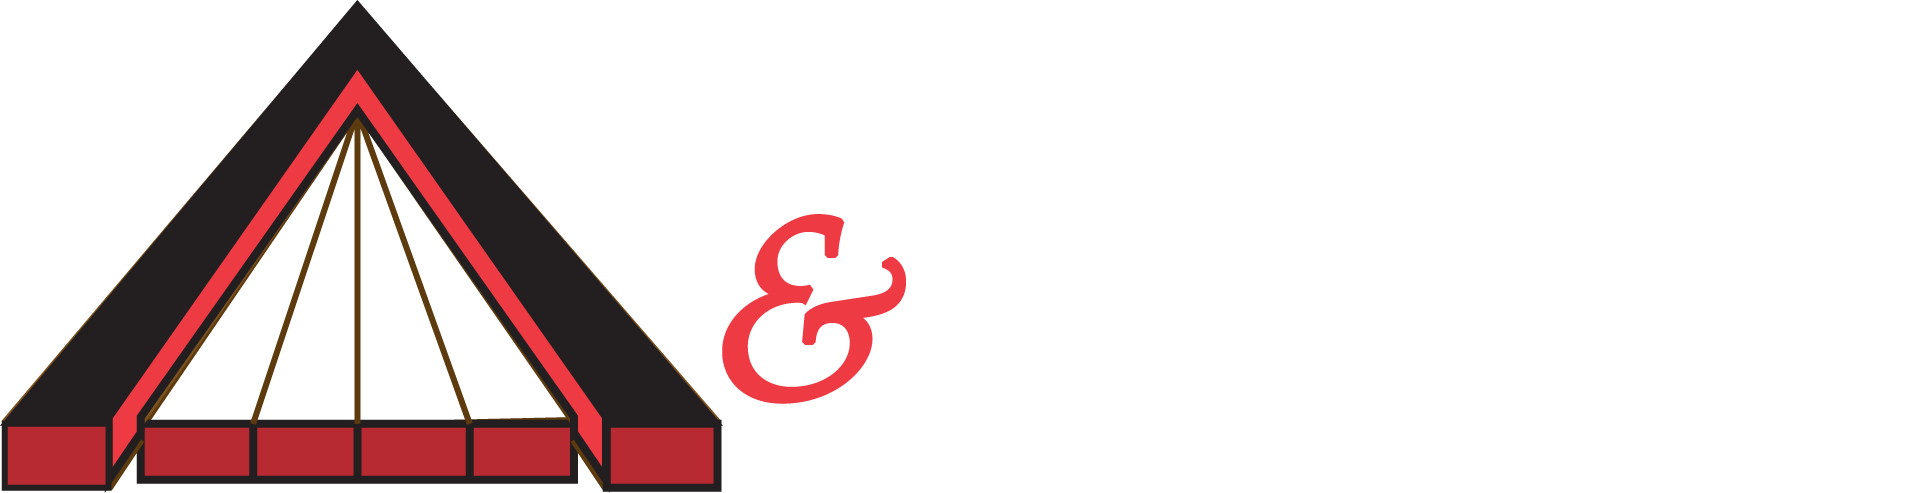 Atlanta Decking Remains Open for Business!